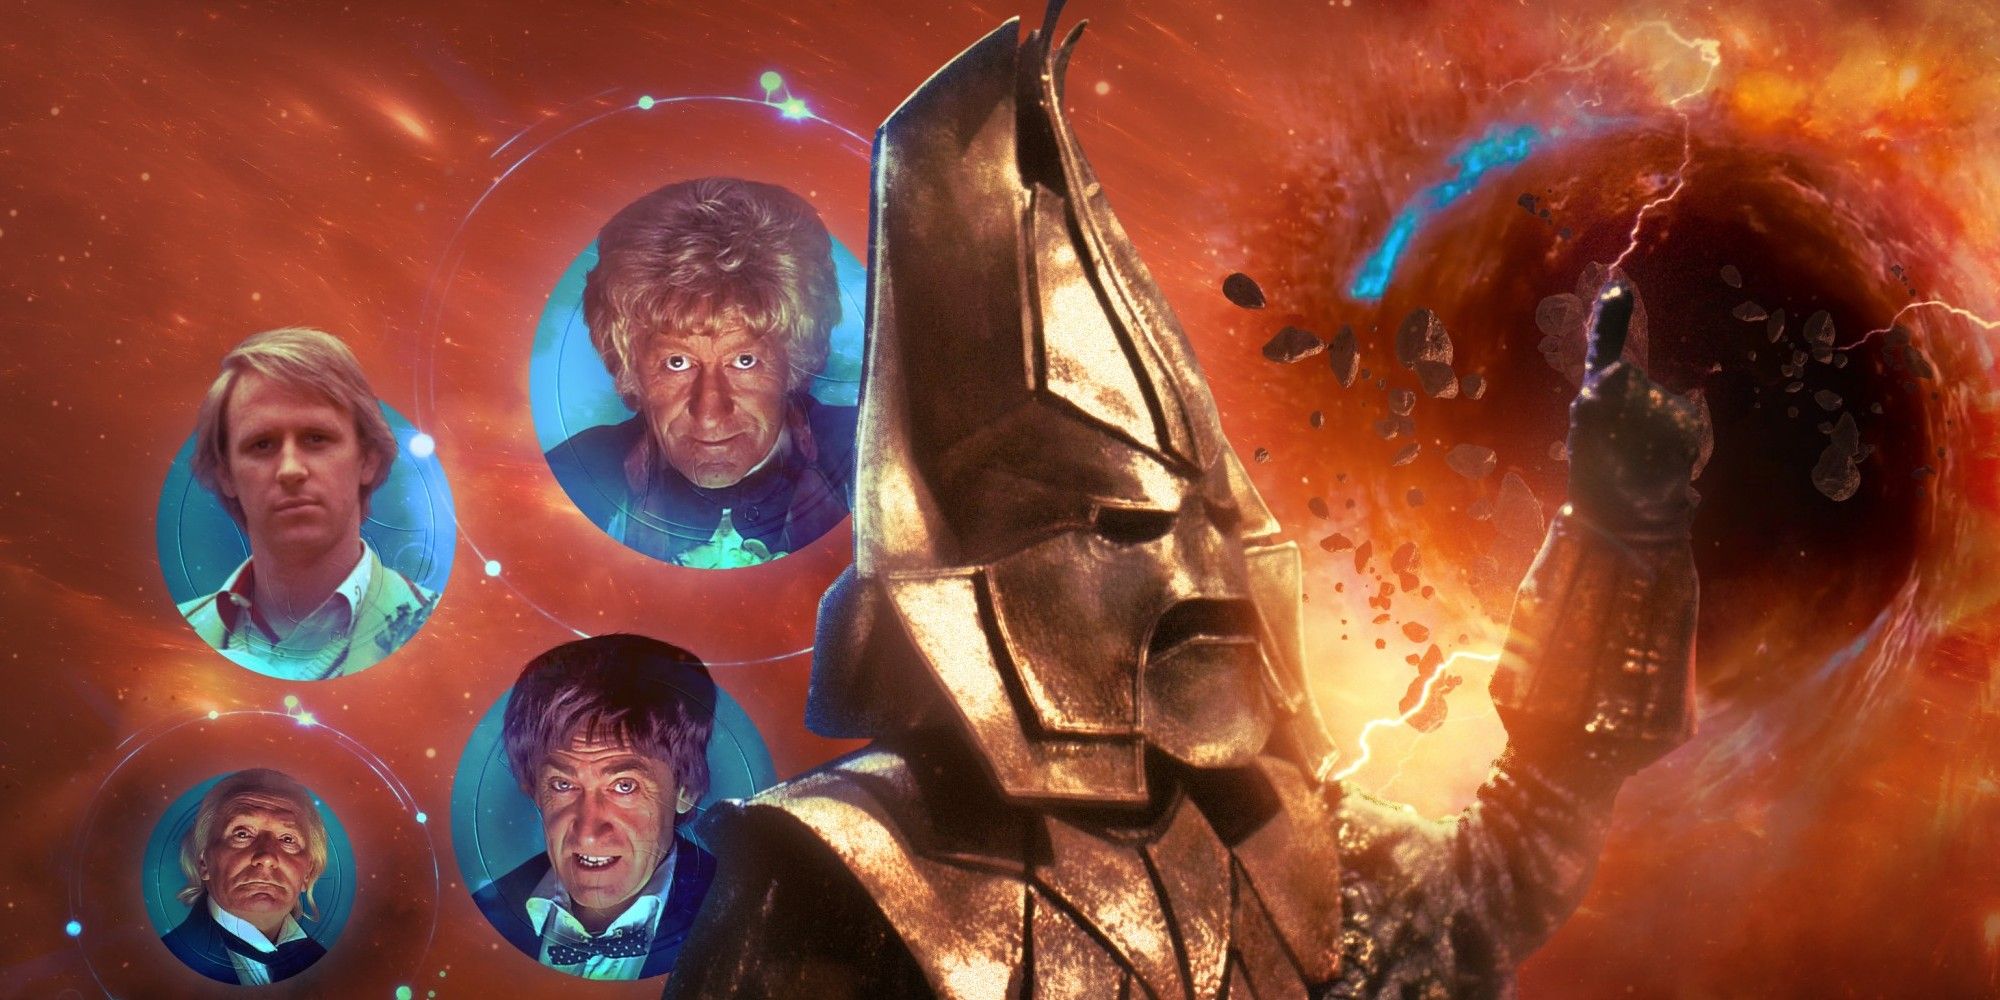 Omega in doctor who